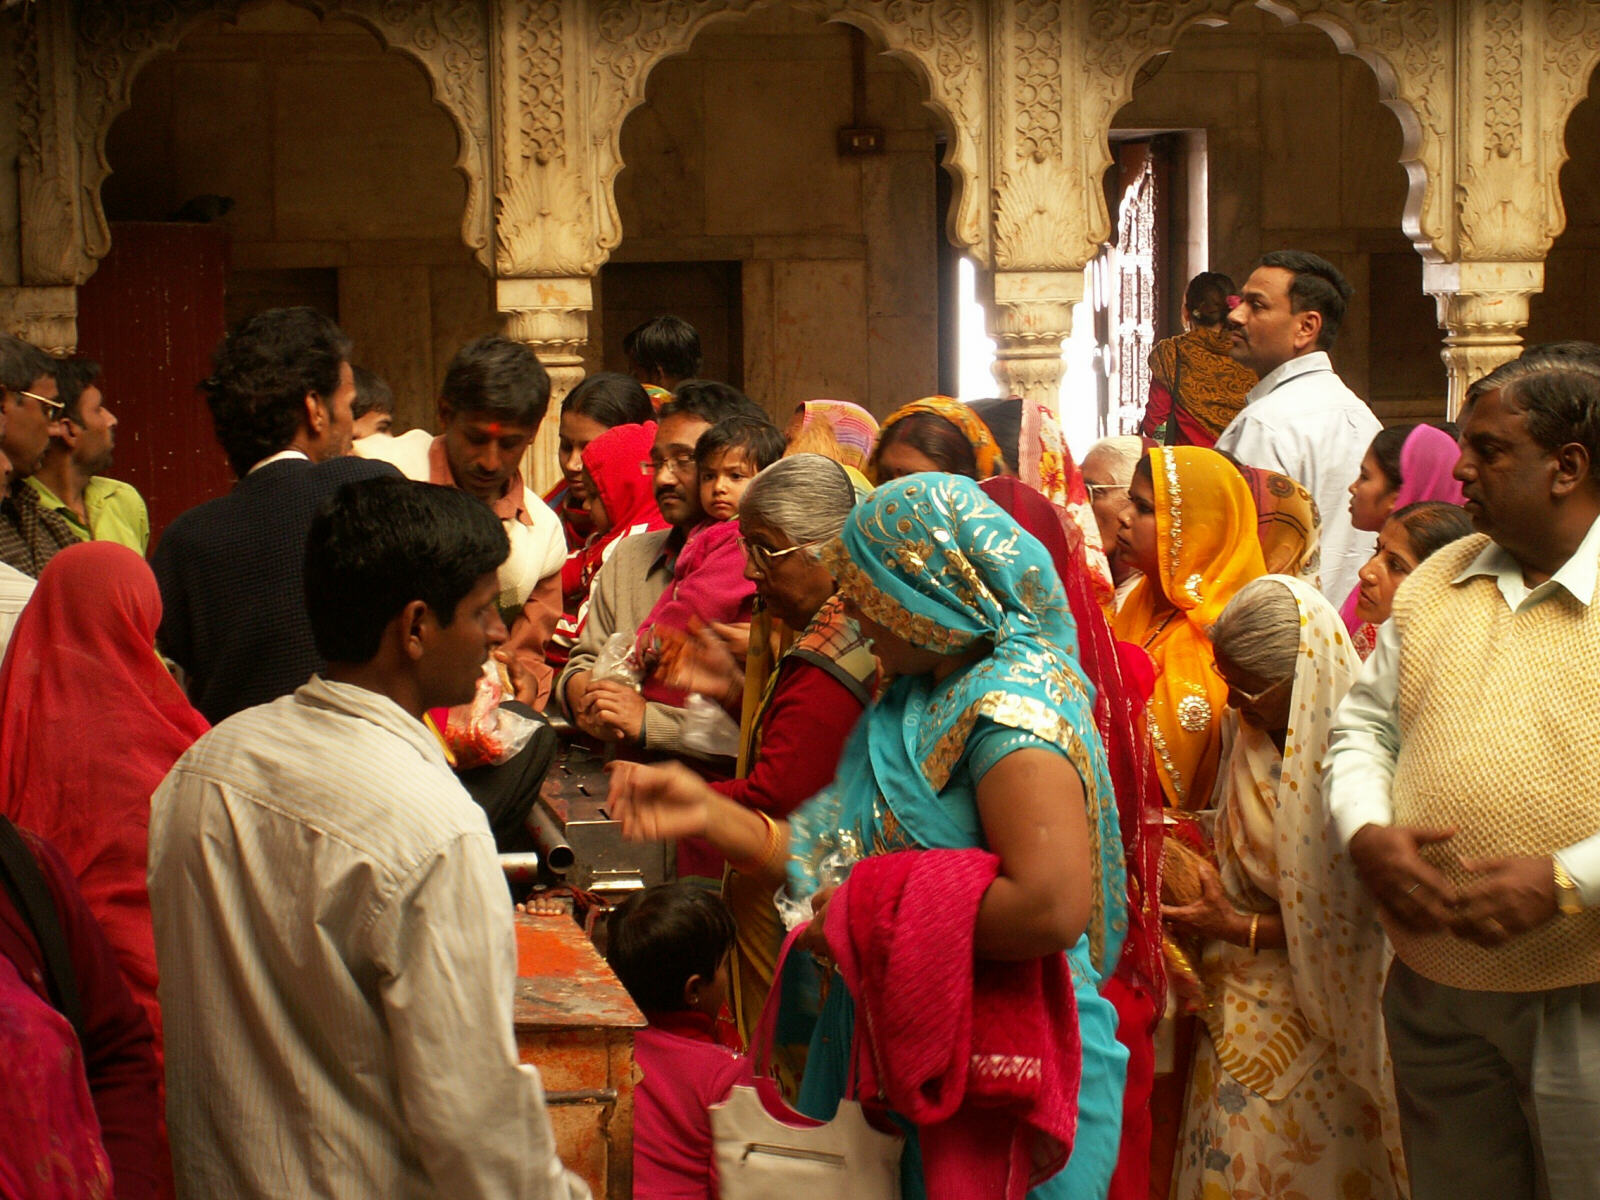 Pilgrims in the Temple of the Rats near Bikaner, Rajasthan